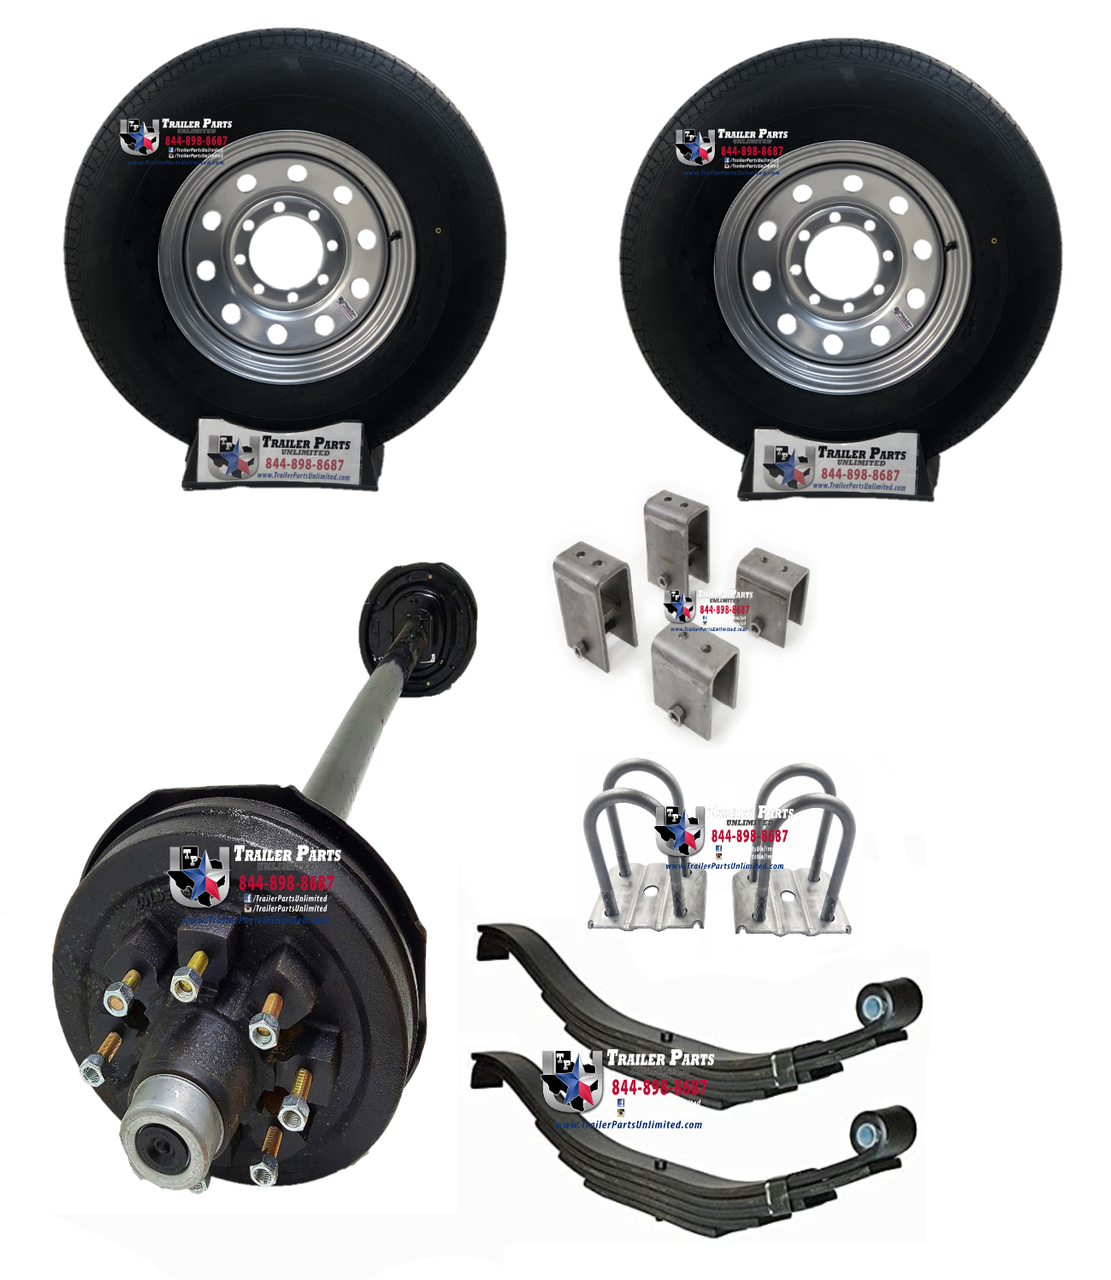 7k Brake Axle Kit w/ 16" 10Ply Tires and Silver Mod Wheels